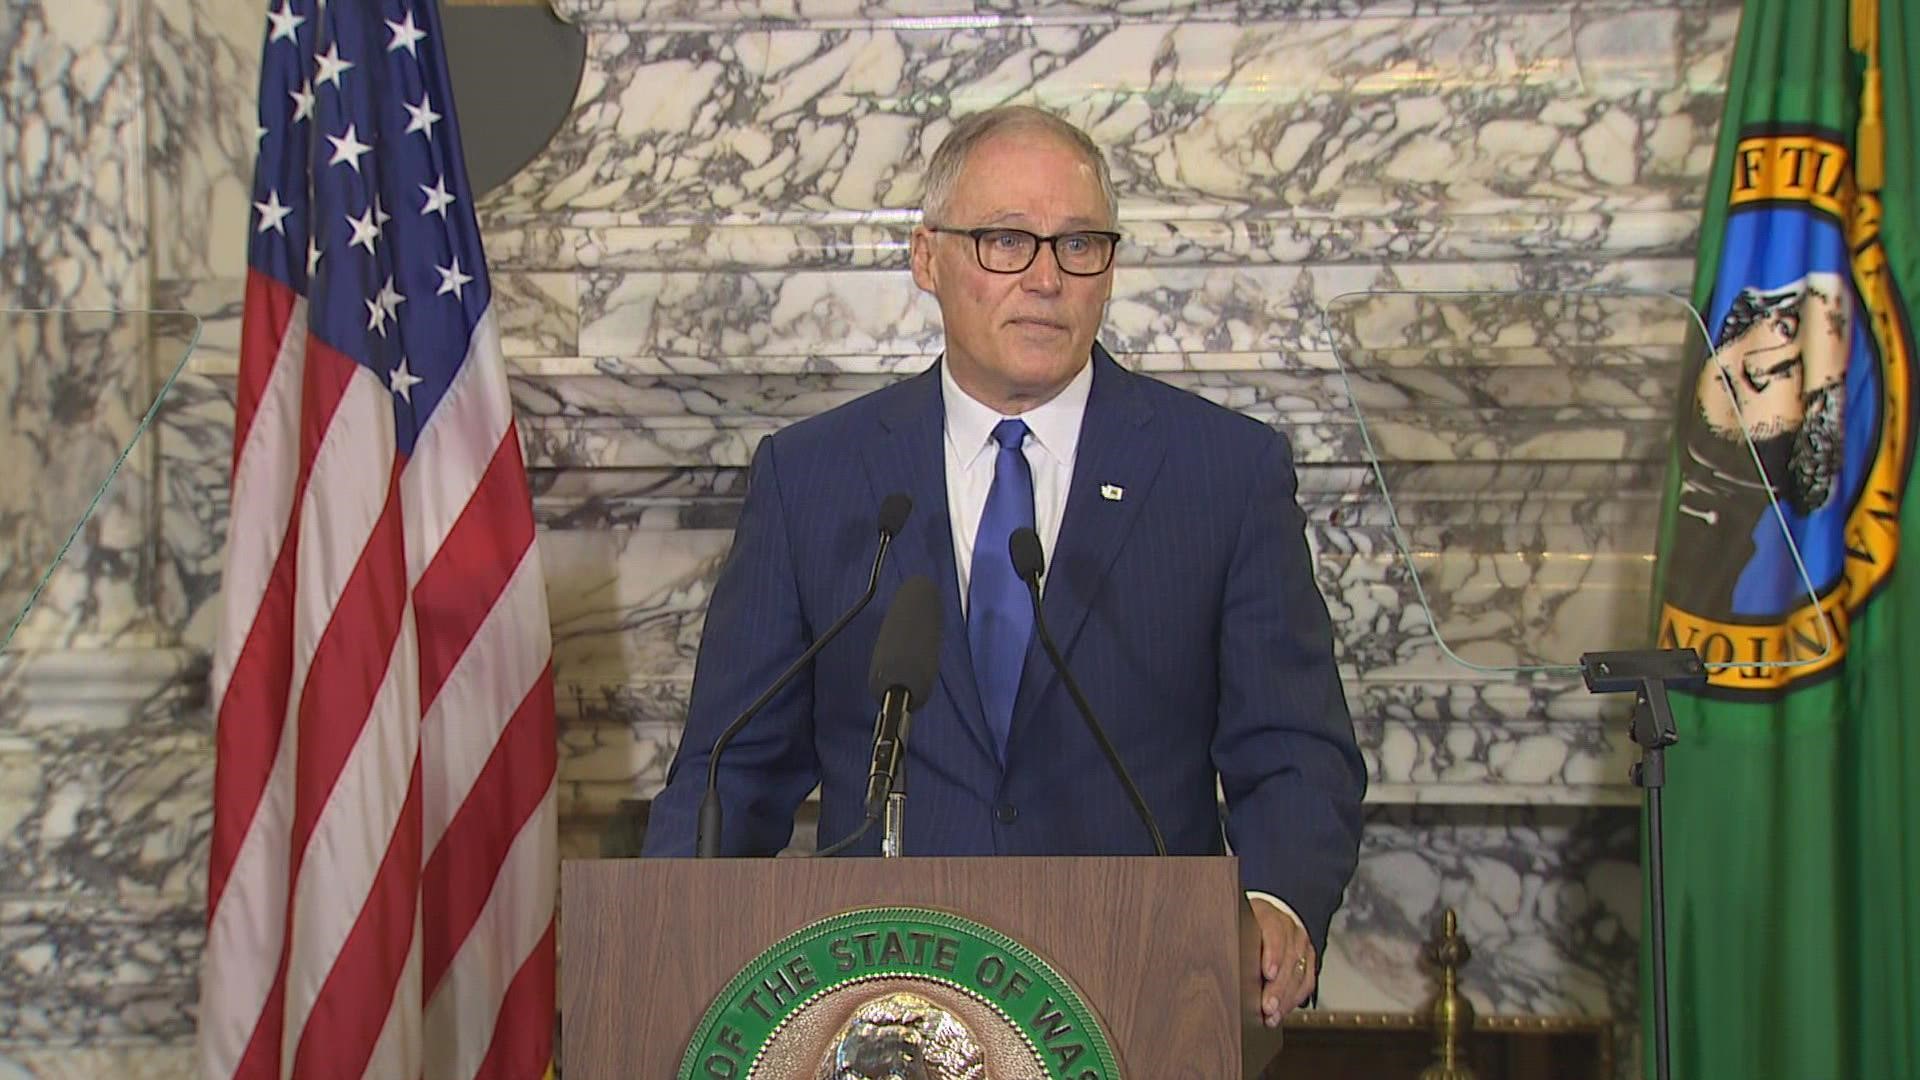 Washington Gov. Jay Inslee gave his State of the State address to the state Legislature Tuesday.